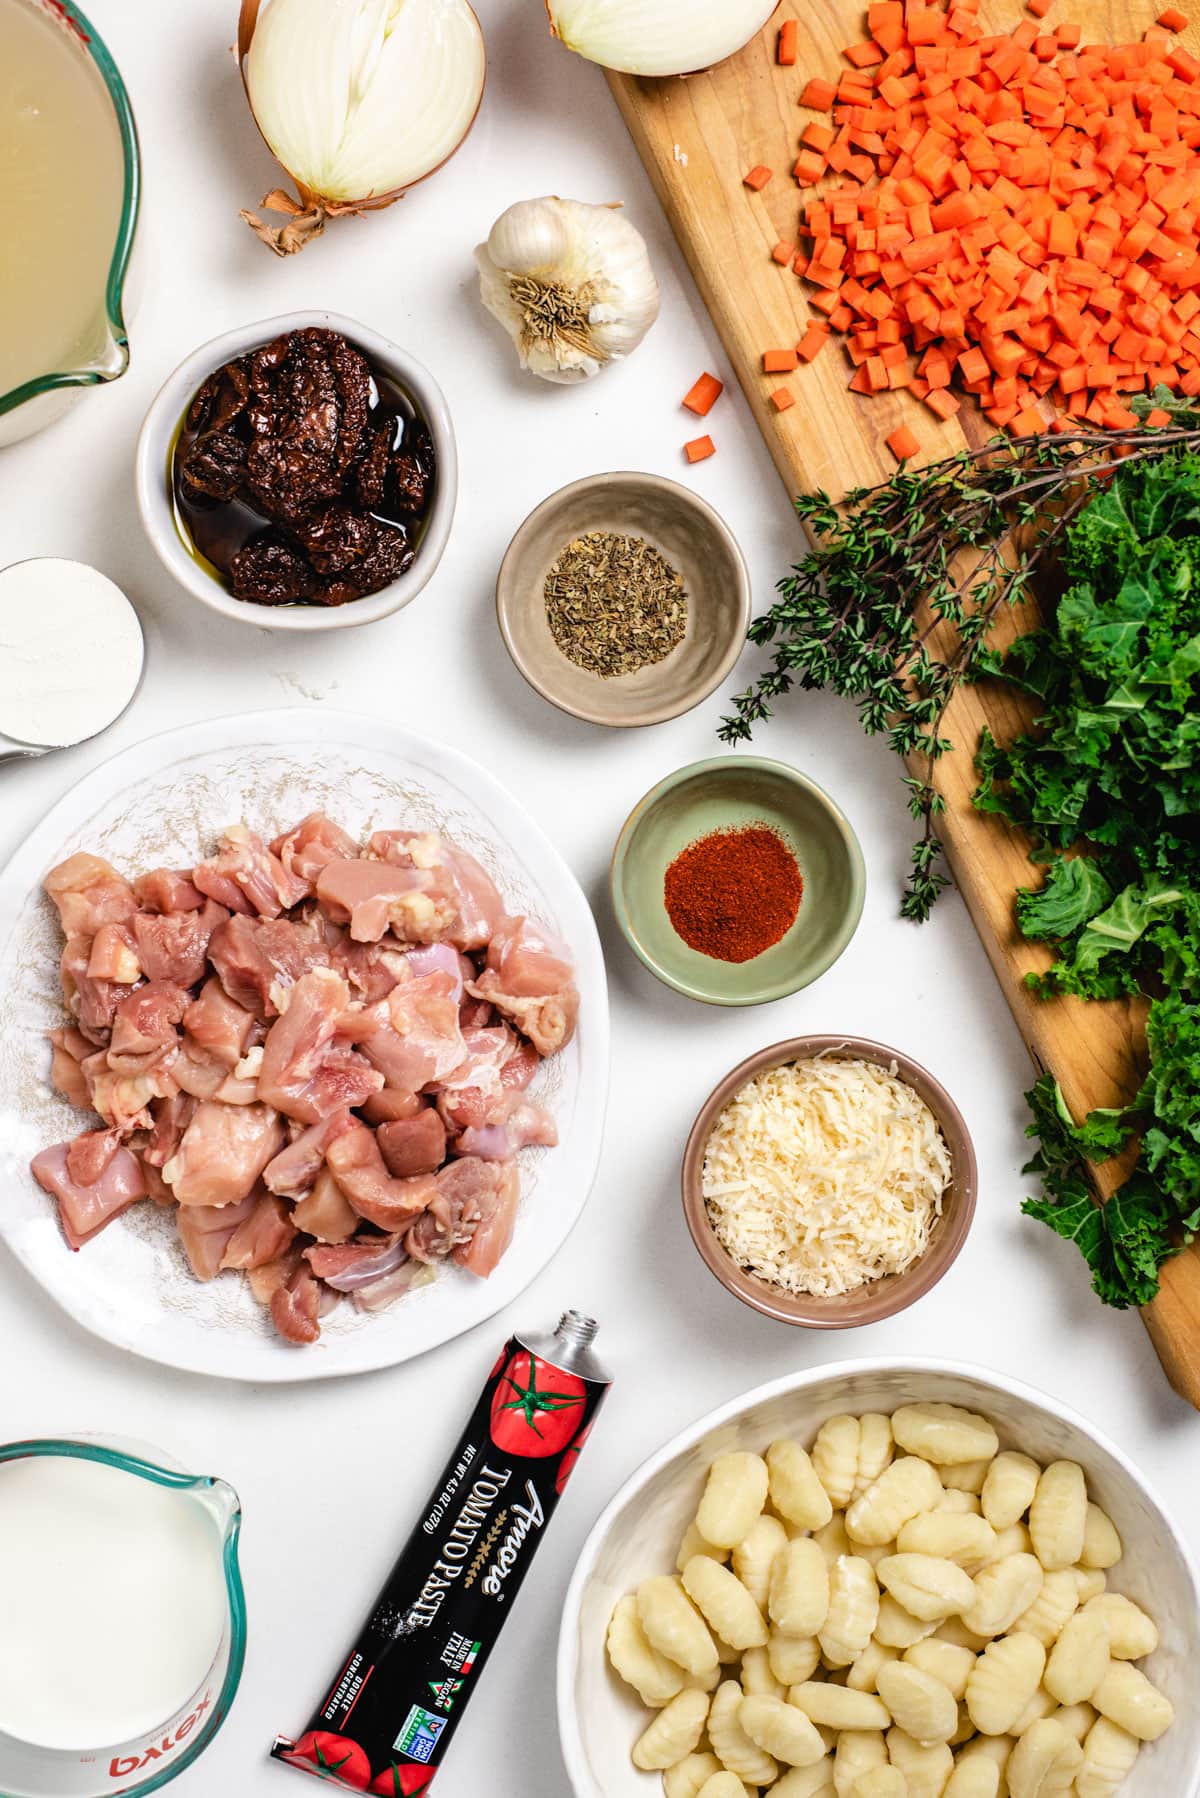 An overhead shot of ingredients used to make chicken gnocchi soup. Pictured in order from top left to right bottom are chicken broth, a halved onion, a head of garlic, chopped carrots, flour, sun-dried tomatoes, Italian seasonings, fresh thyme, chicken thighs, smoked paprika, kale, parmesan cheese, half-and-half, tomato paste, and fresh gnocchi.